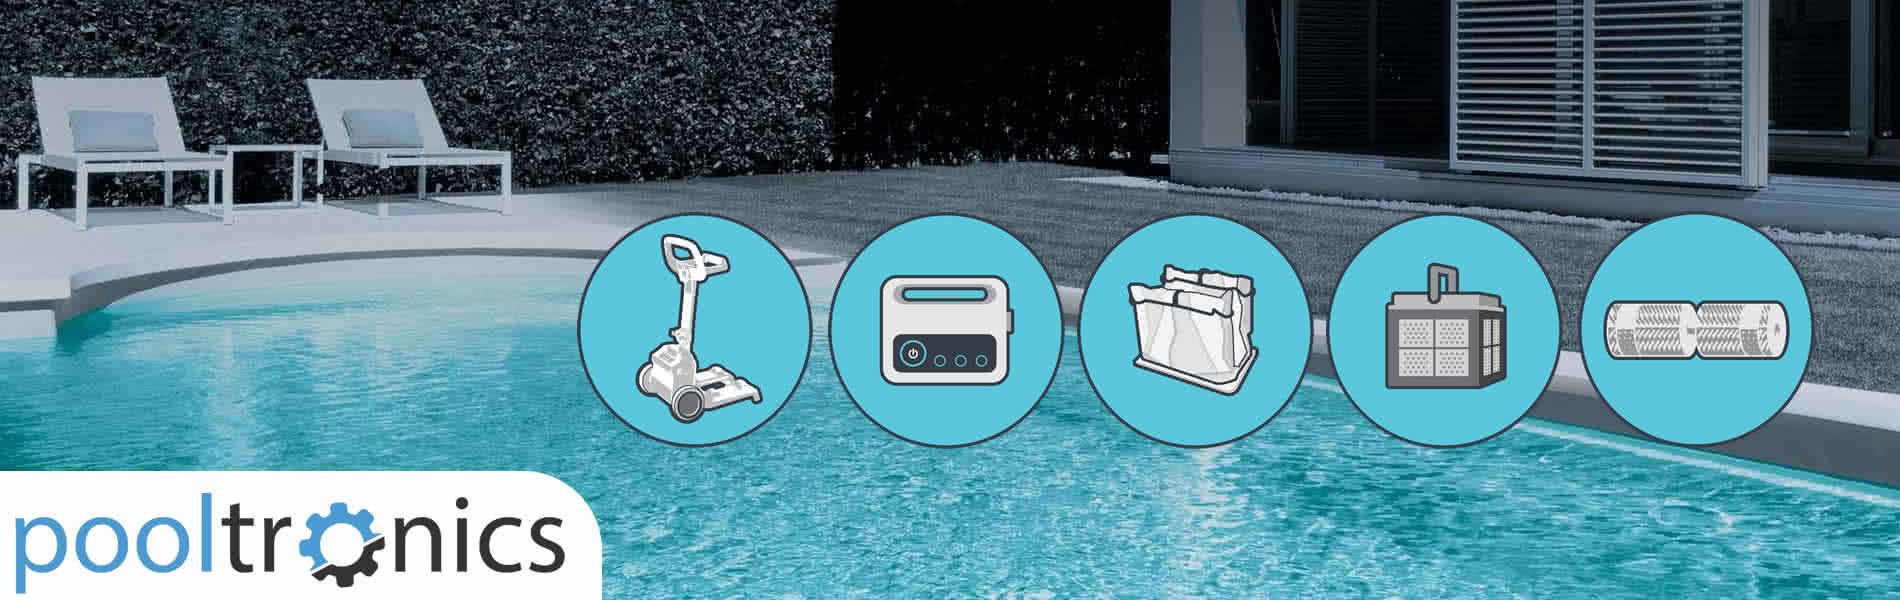 Dolphin Robotic Pool Cleaner Spare Parts | Pooltronics